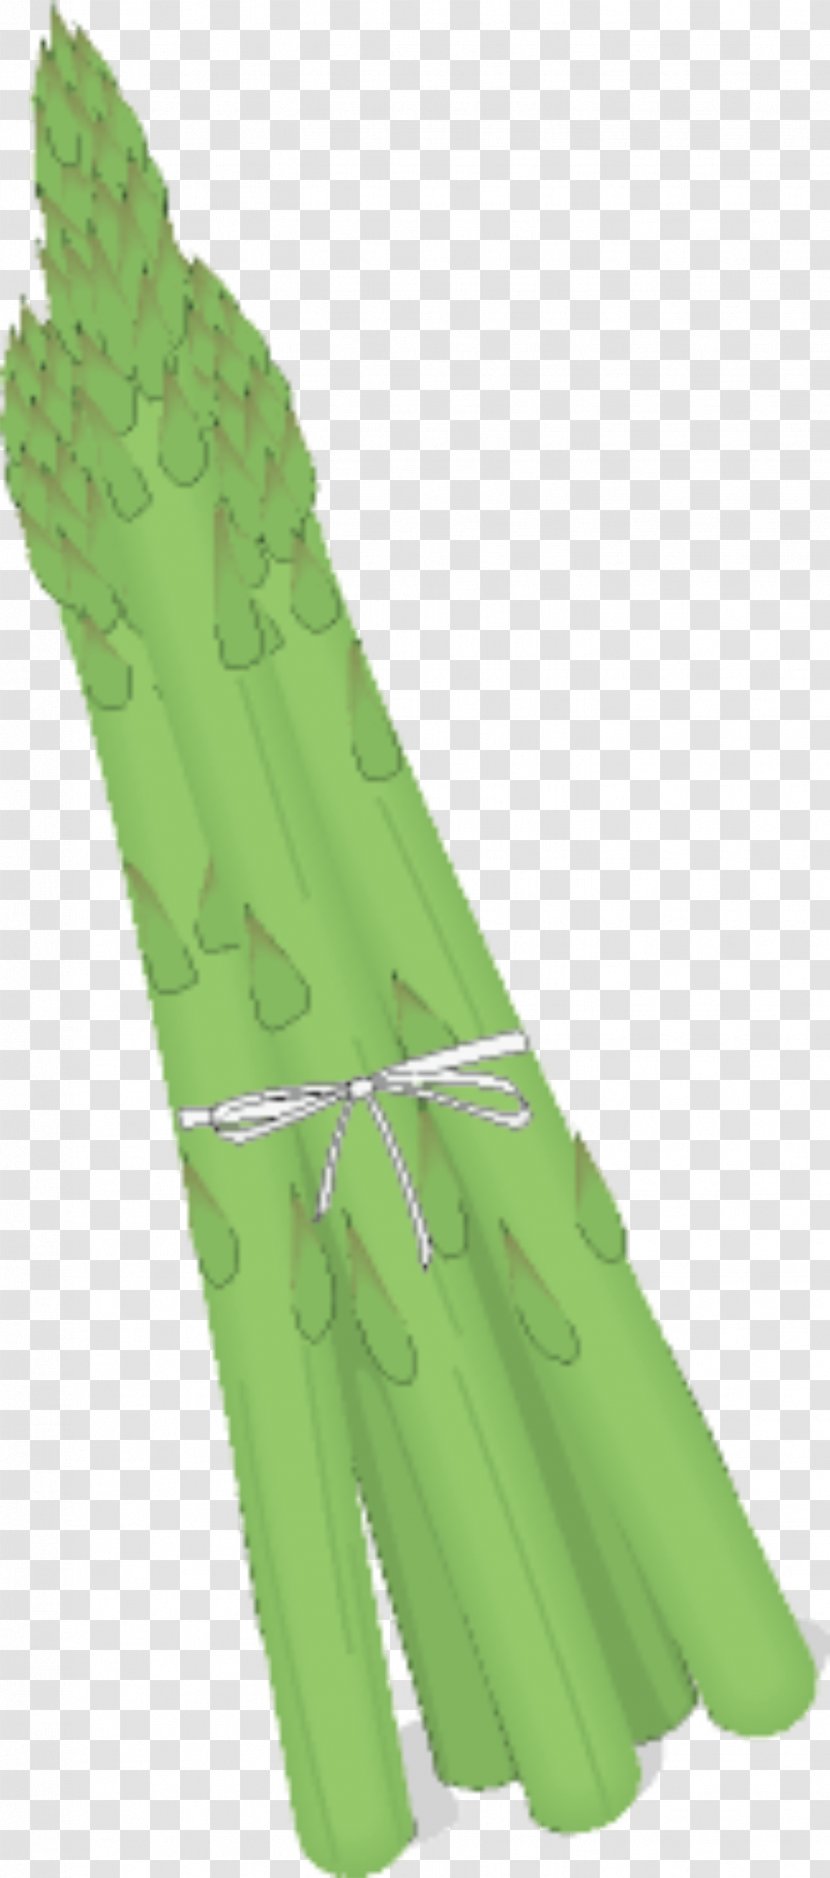 Bamboo Shoot Vegetable Bamboe - Shoots Transparent PNG